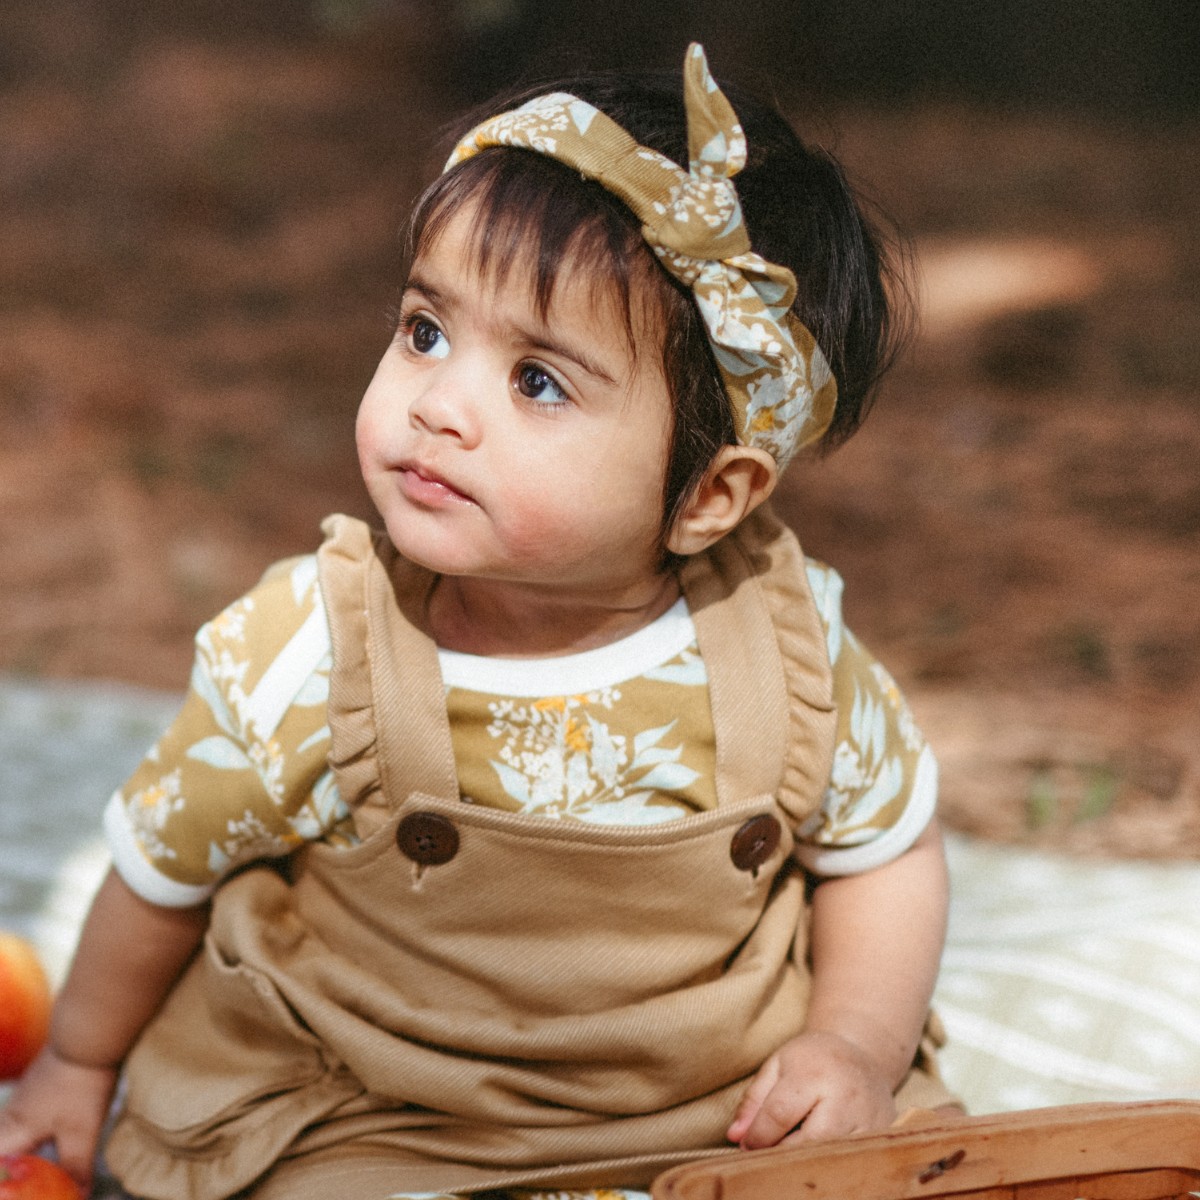 Baby girl sitting on a picnic blanket wearing the Gold Floral organic cotton Knotted Headband by Milkbarn